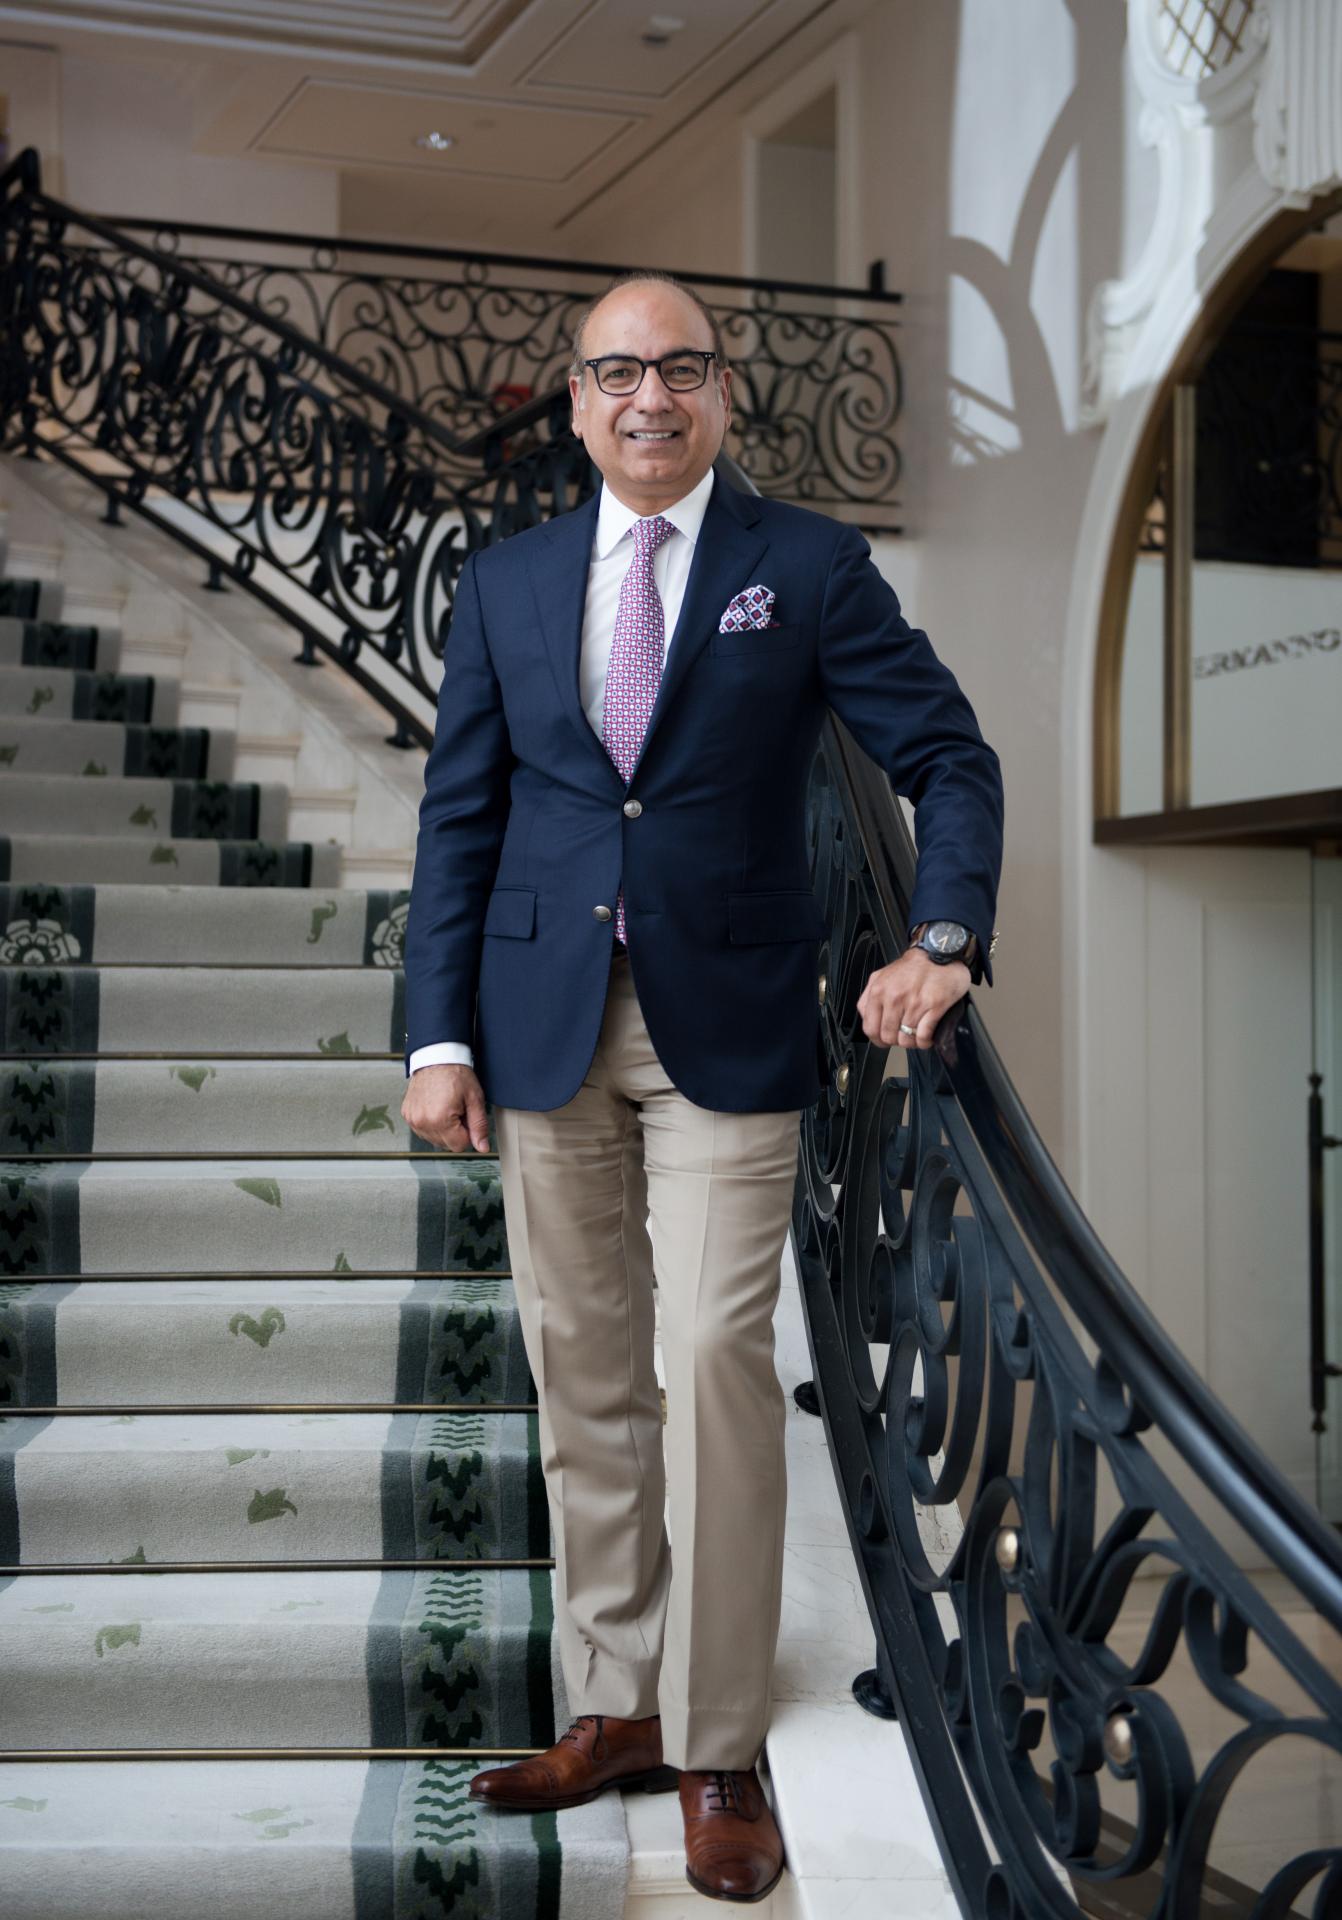 On September 5th Four Seasons Hotel Baku welcomed its new General Manager – Mr. Bob Suri (PHOTO)